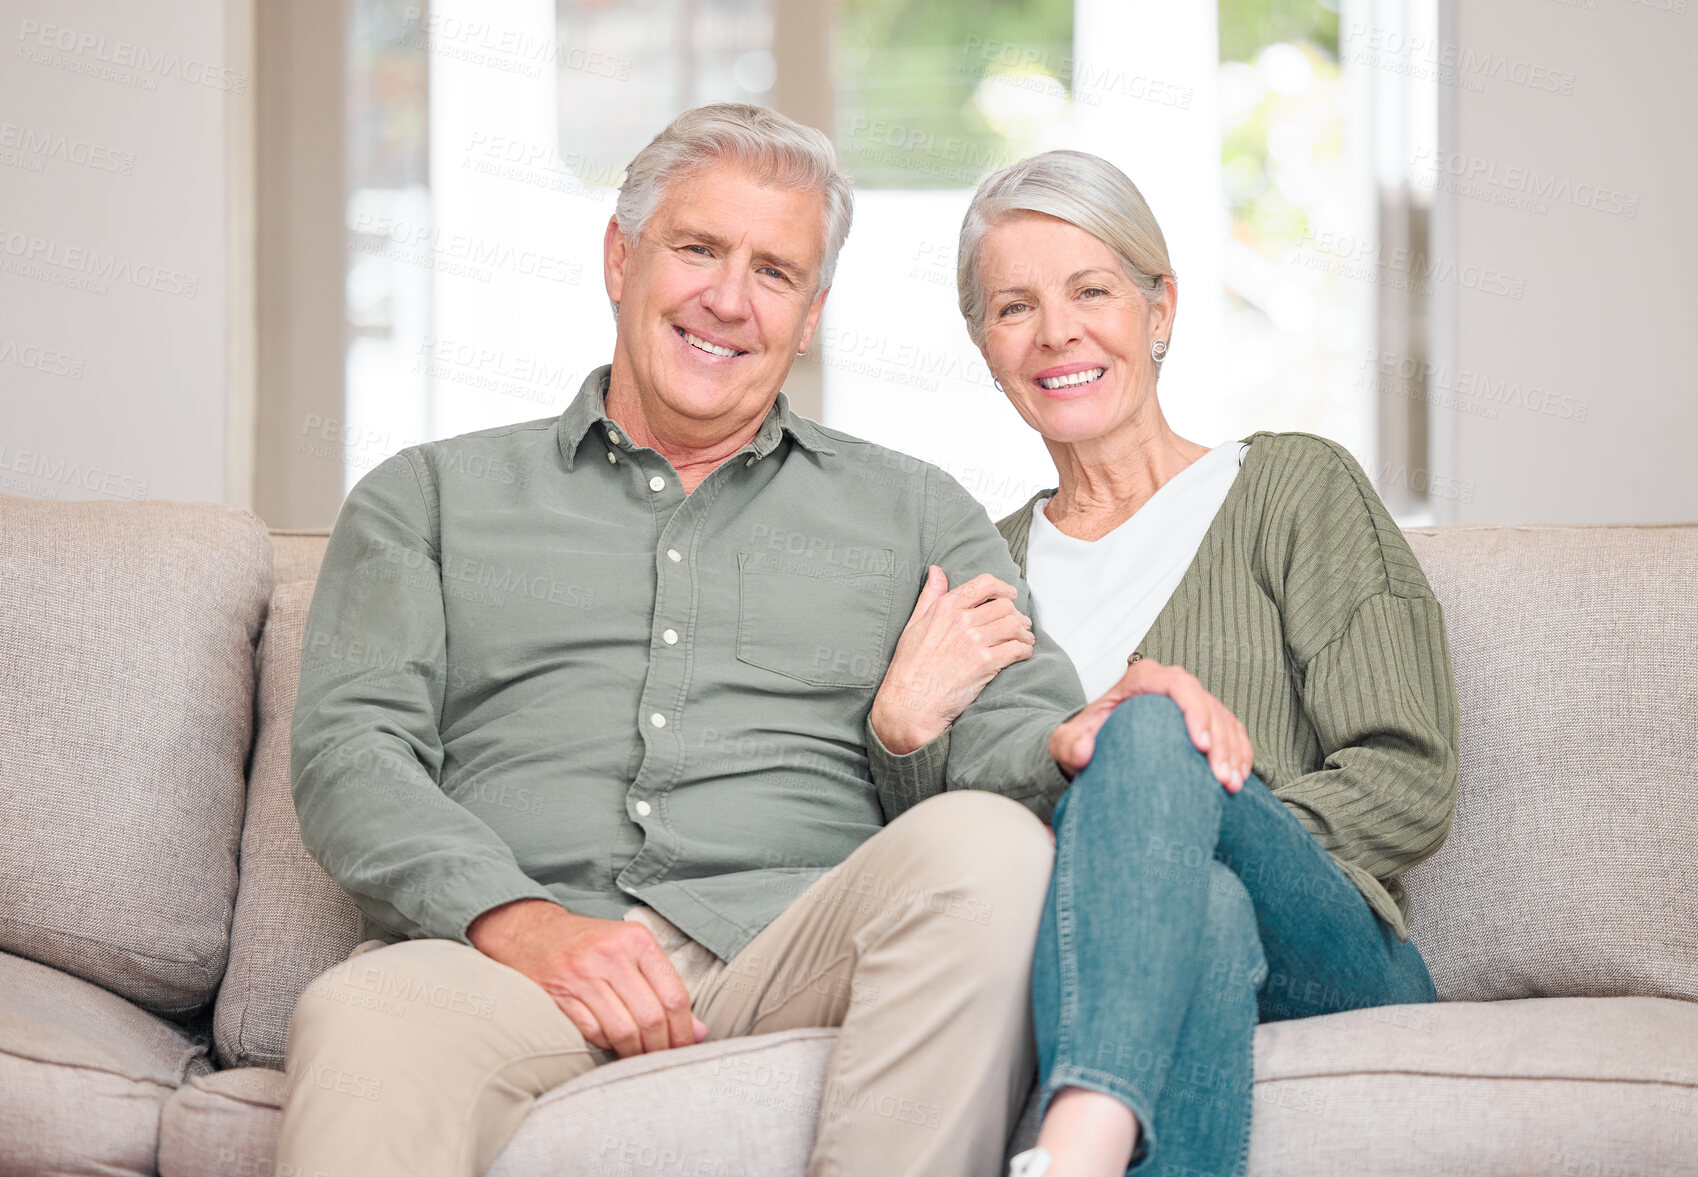 Buy stock photo Cropped portrait of an affectionate senior couple sitting on the sofa at home